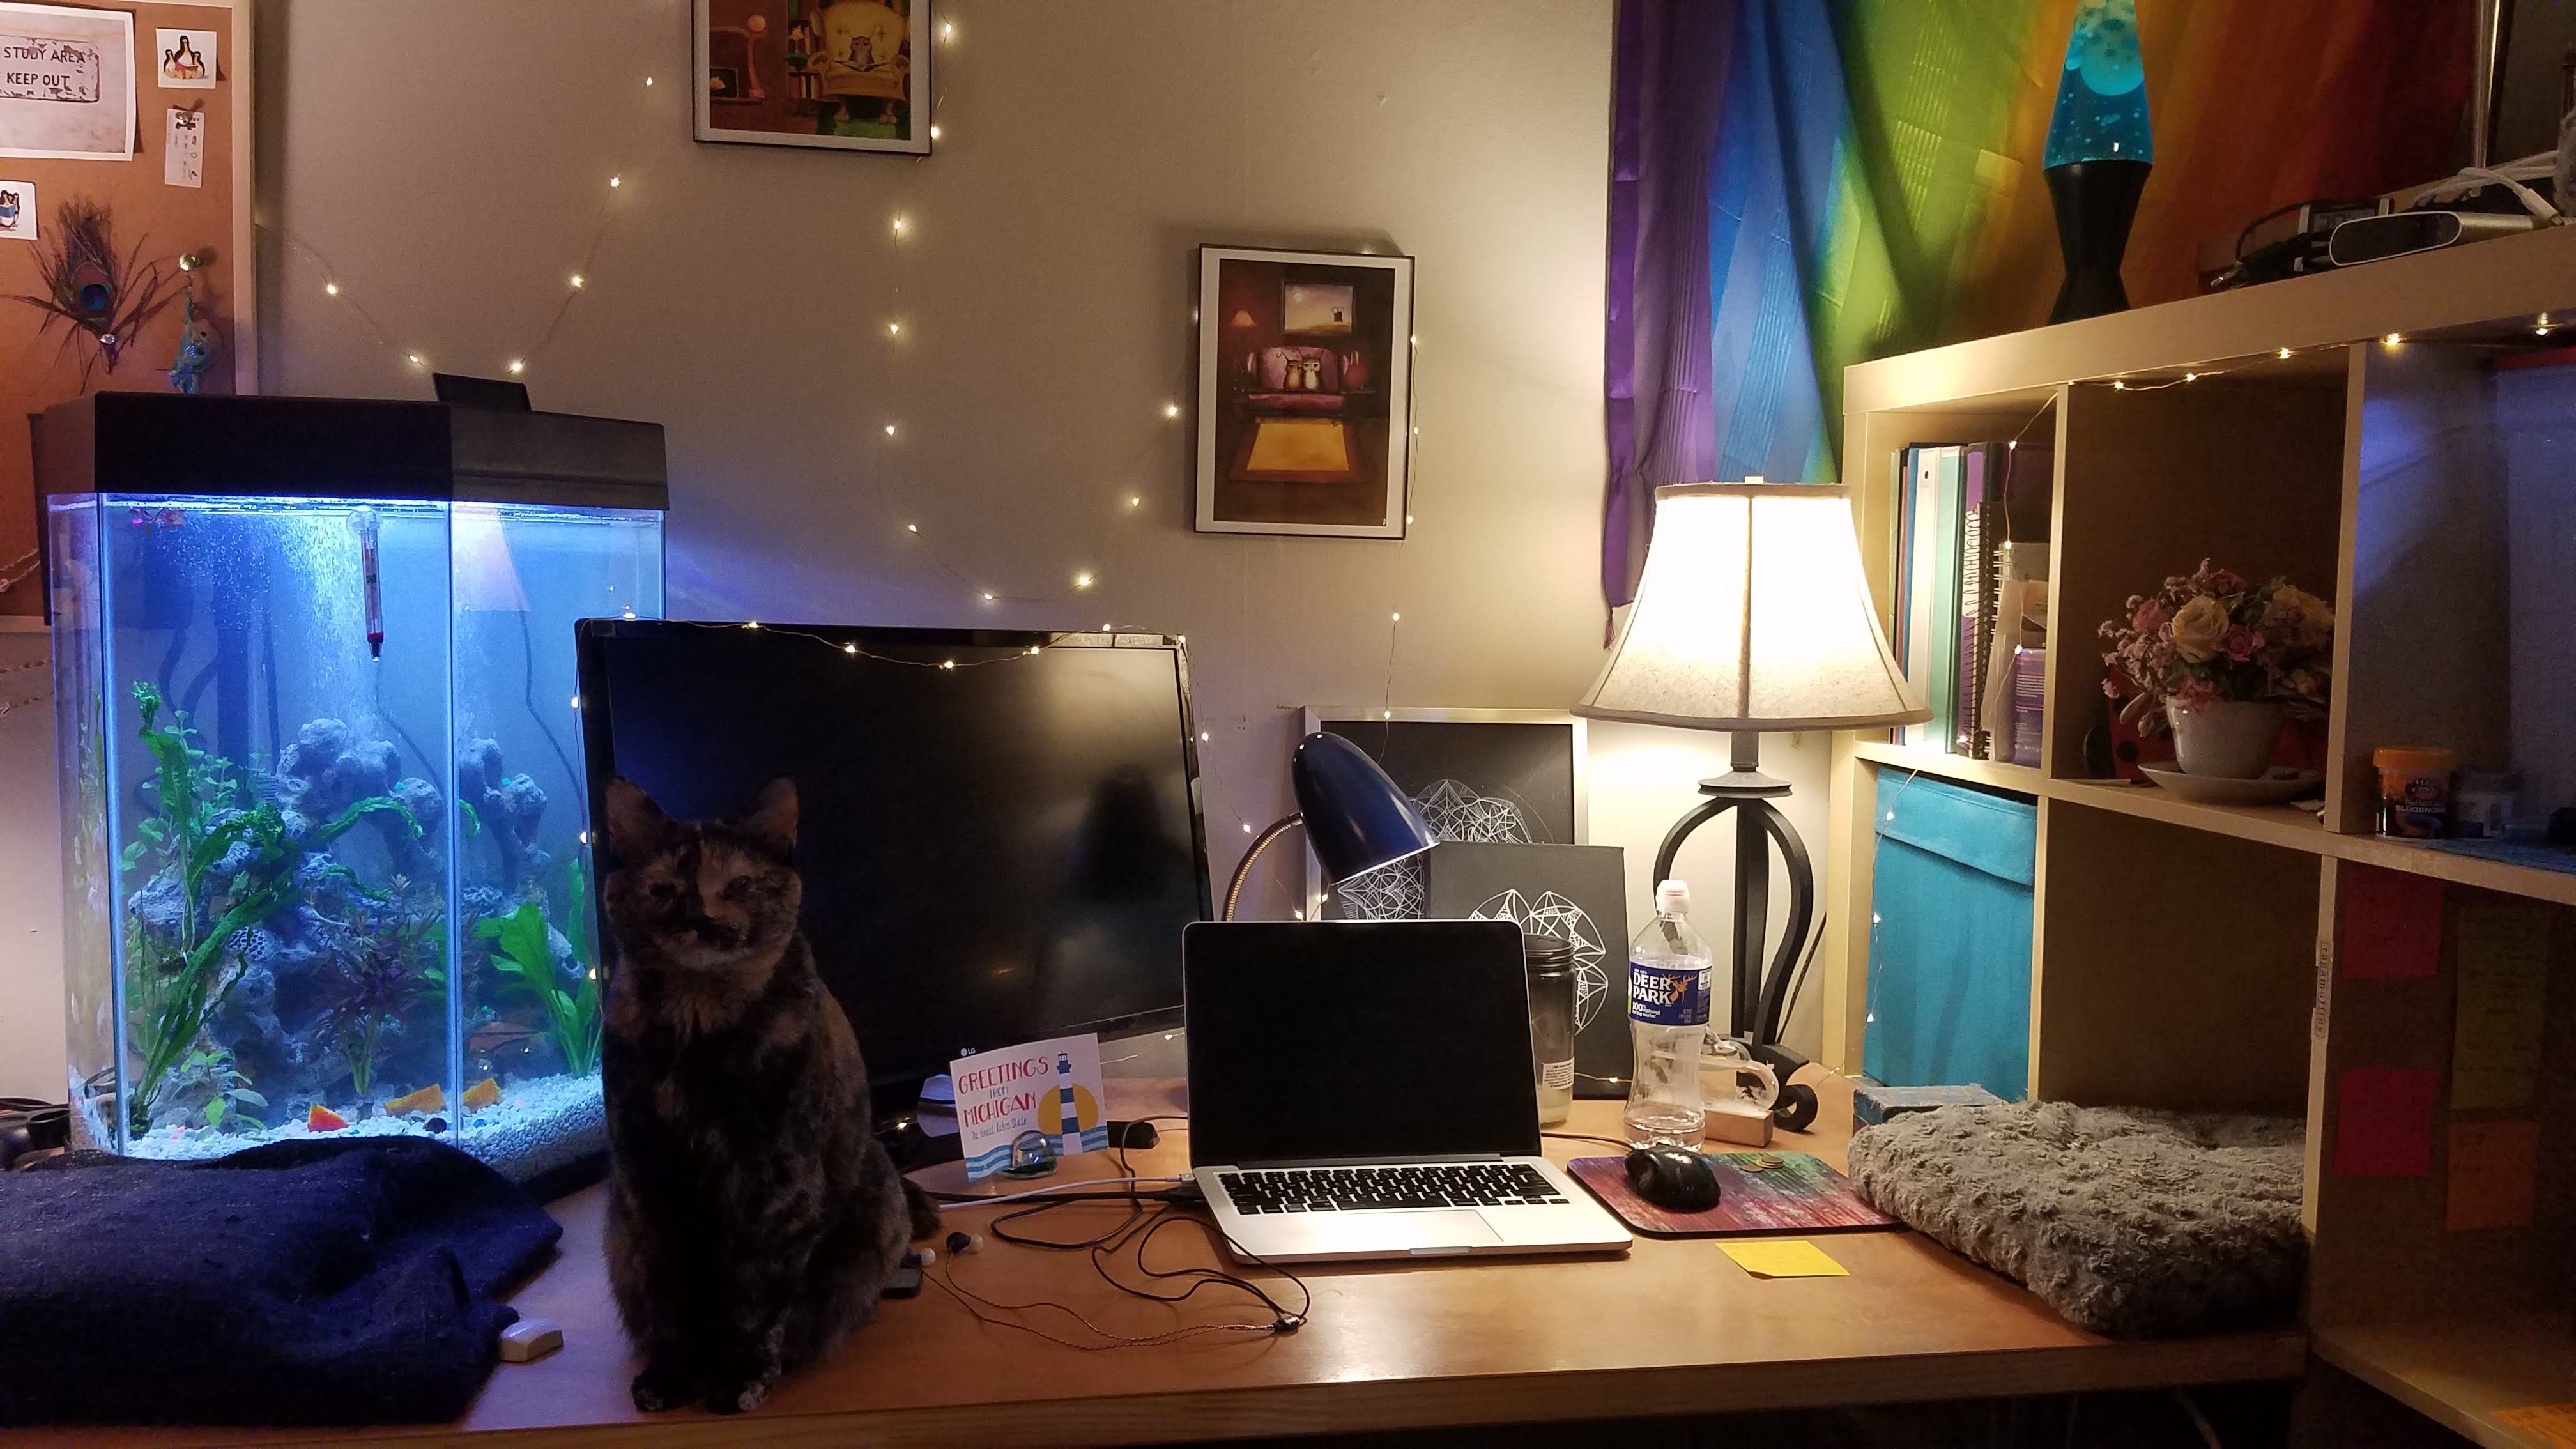 Candice's work station includes a cat, an aquarium, and mood lighting